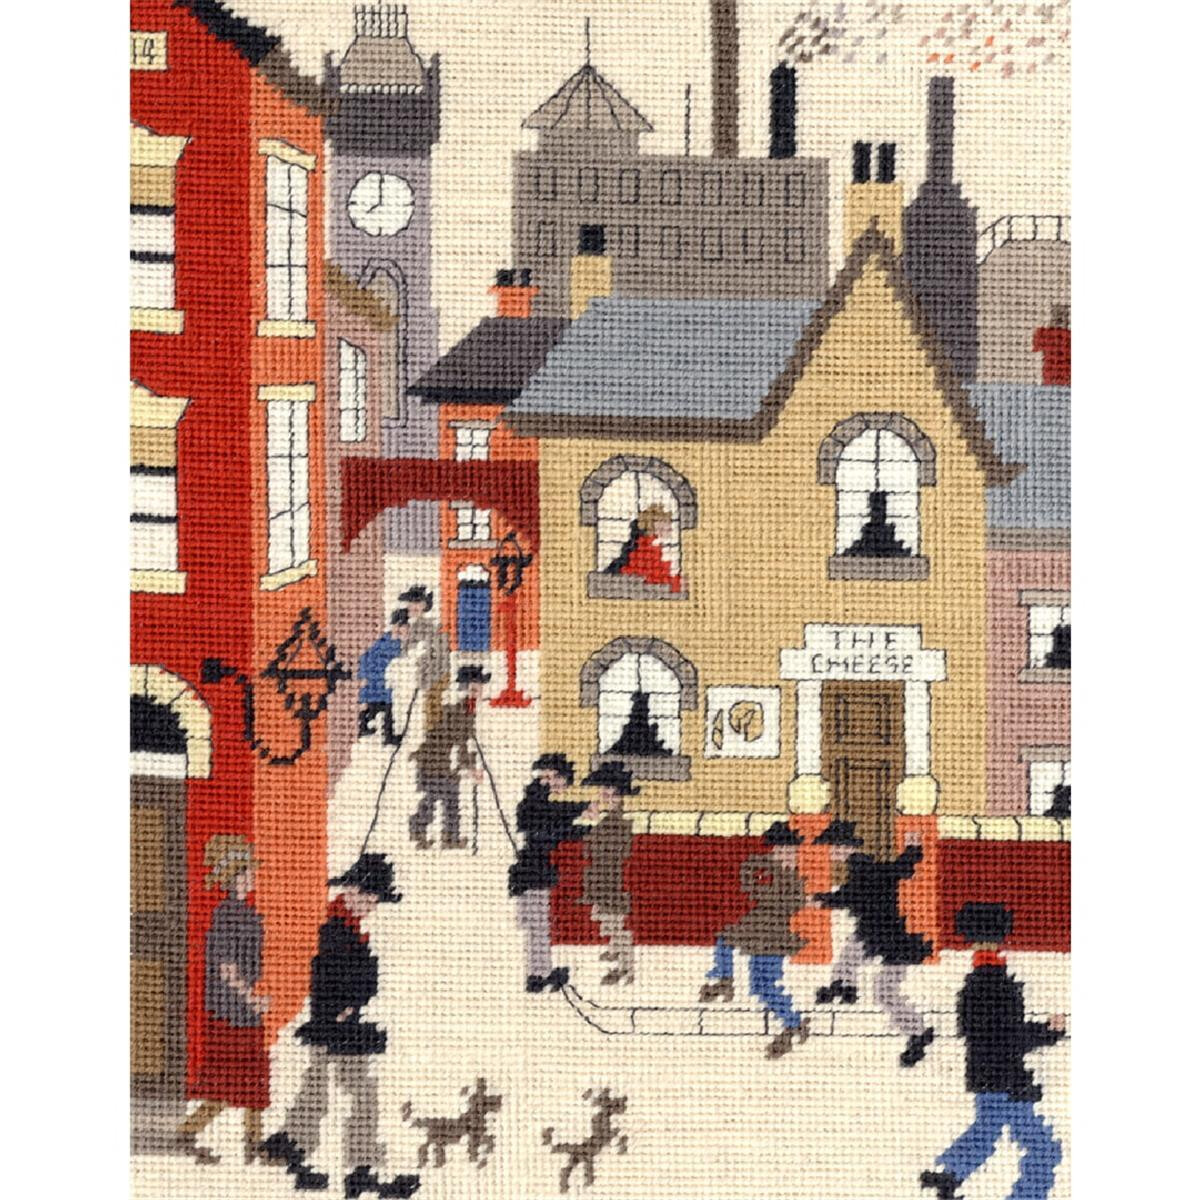 A picturesque street scene in a charming embroidery pack...